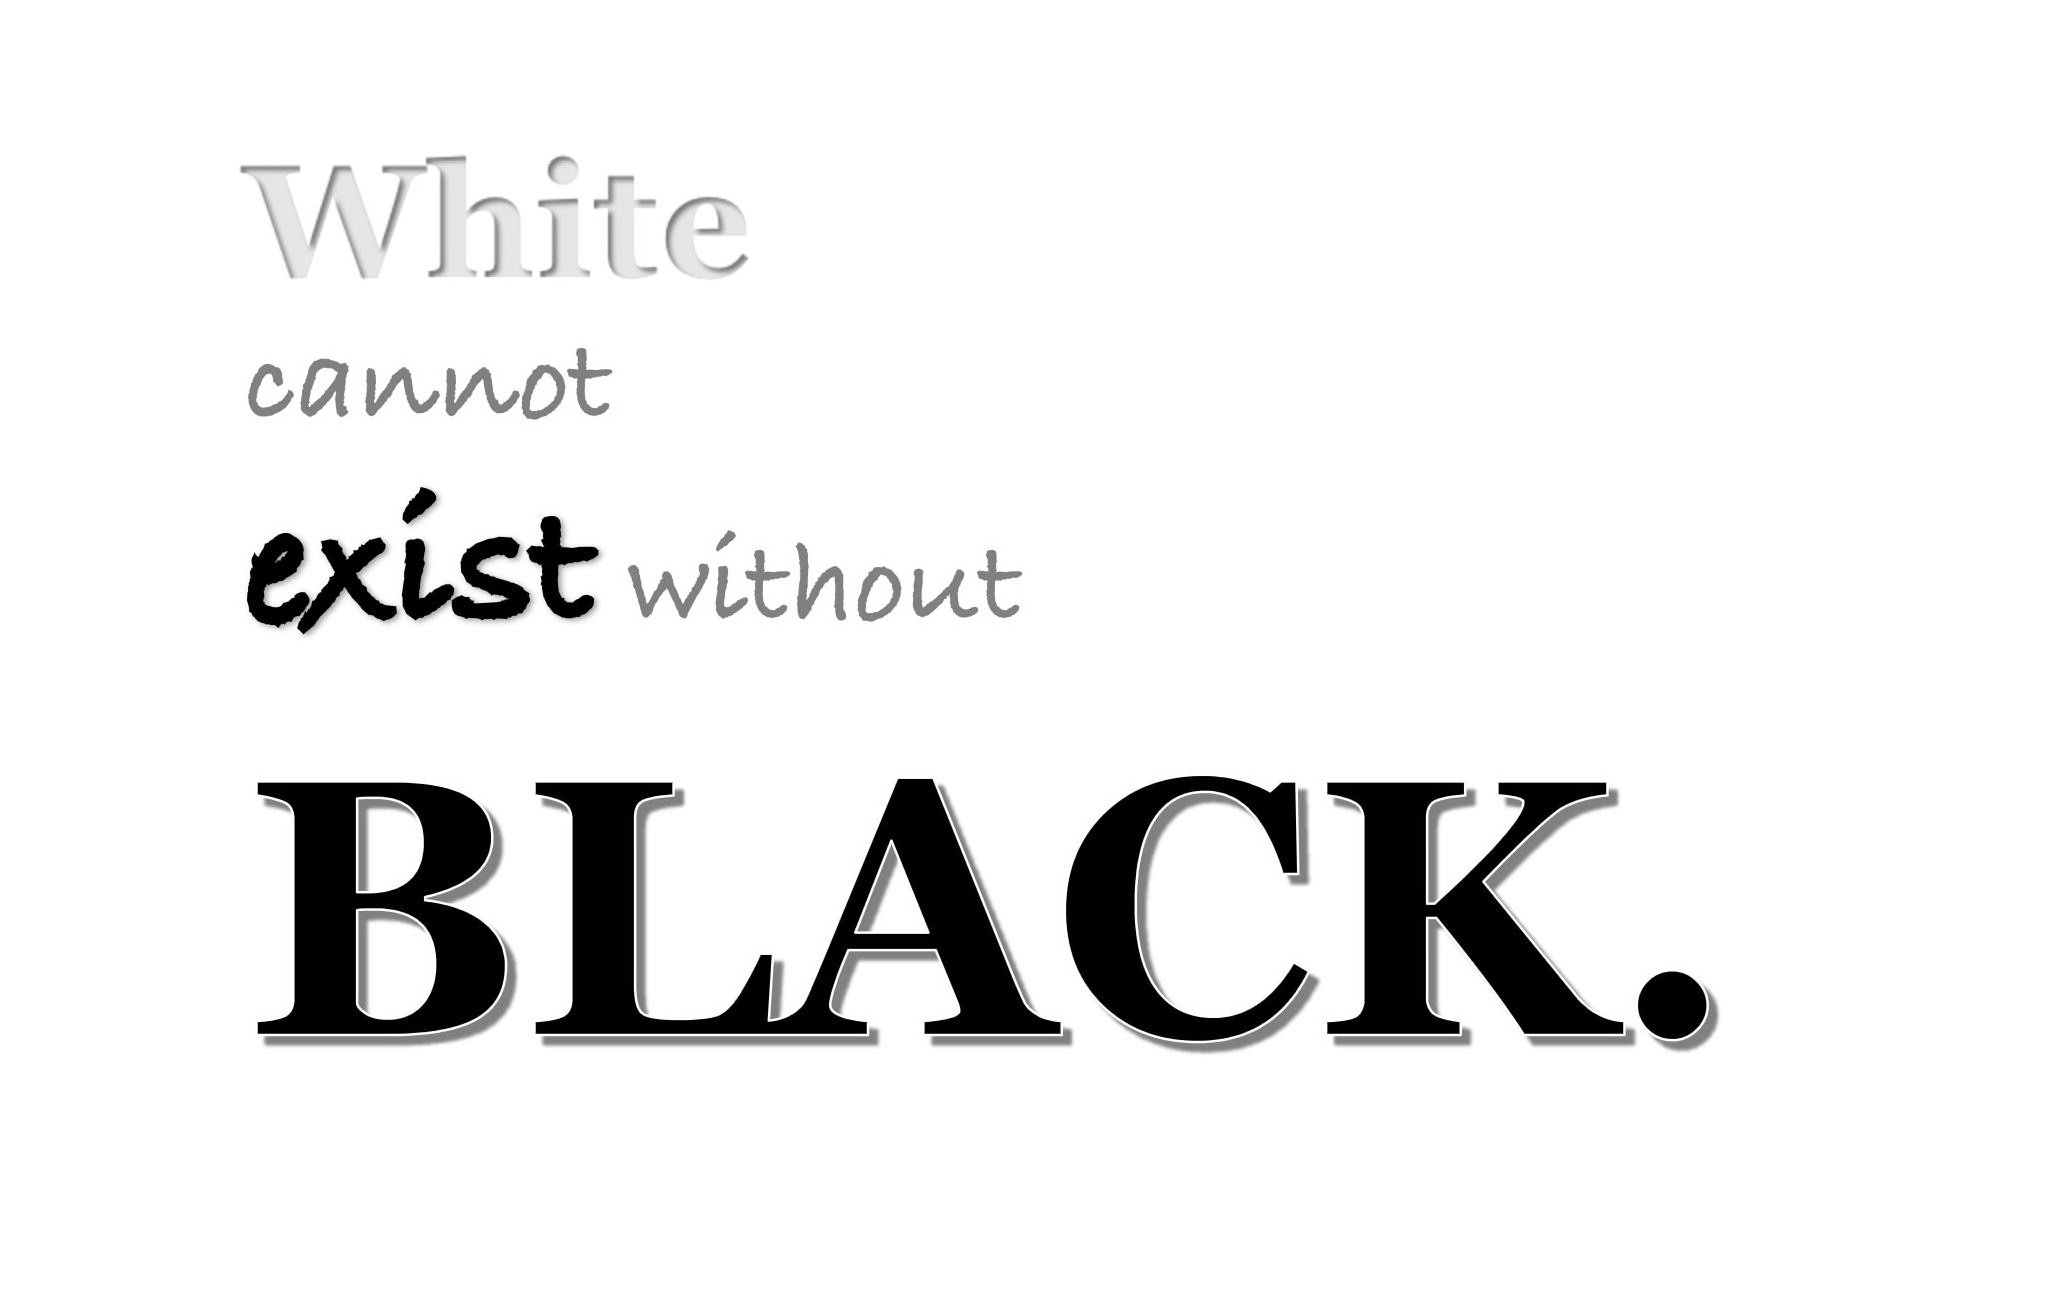 Trademark Logo WHITE CANNOT EXIST WITHOUT BLACK.